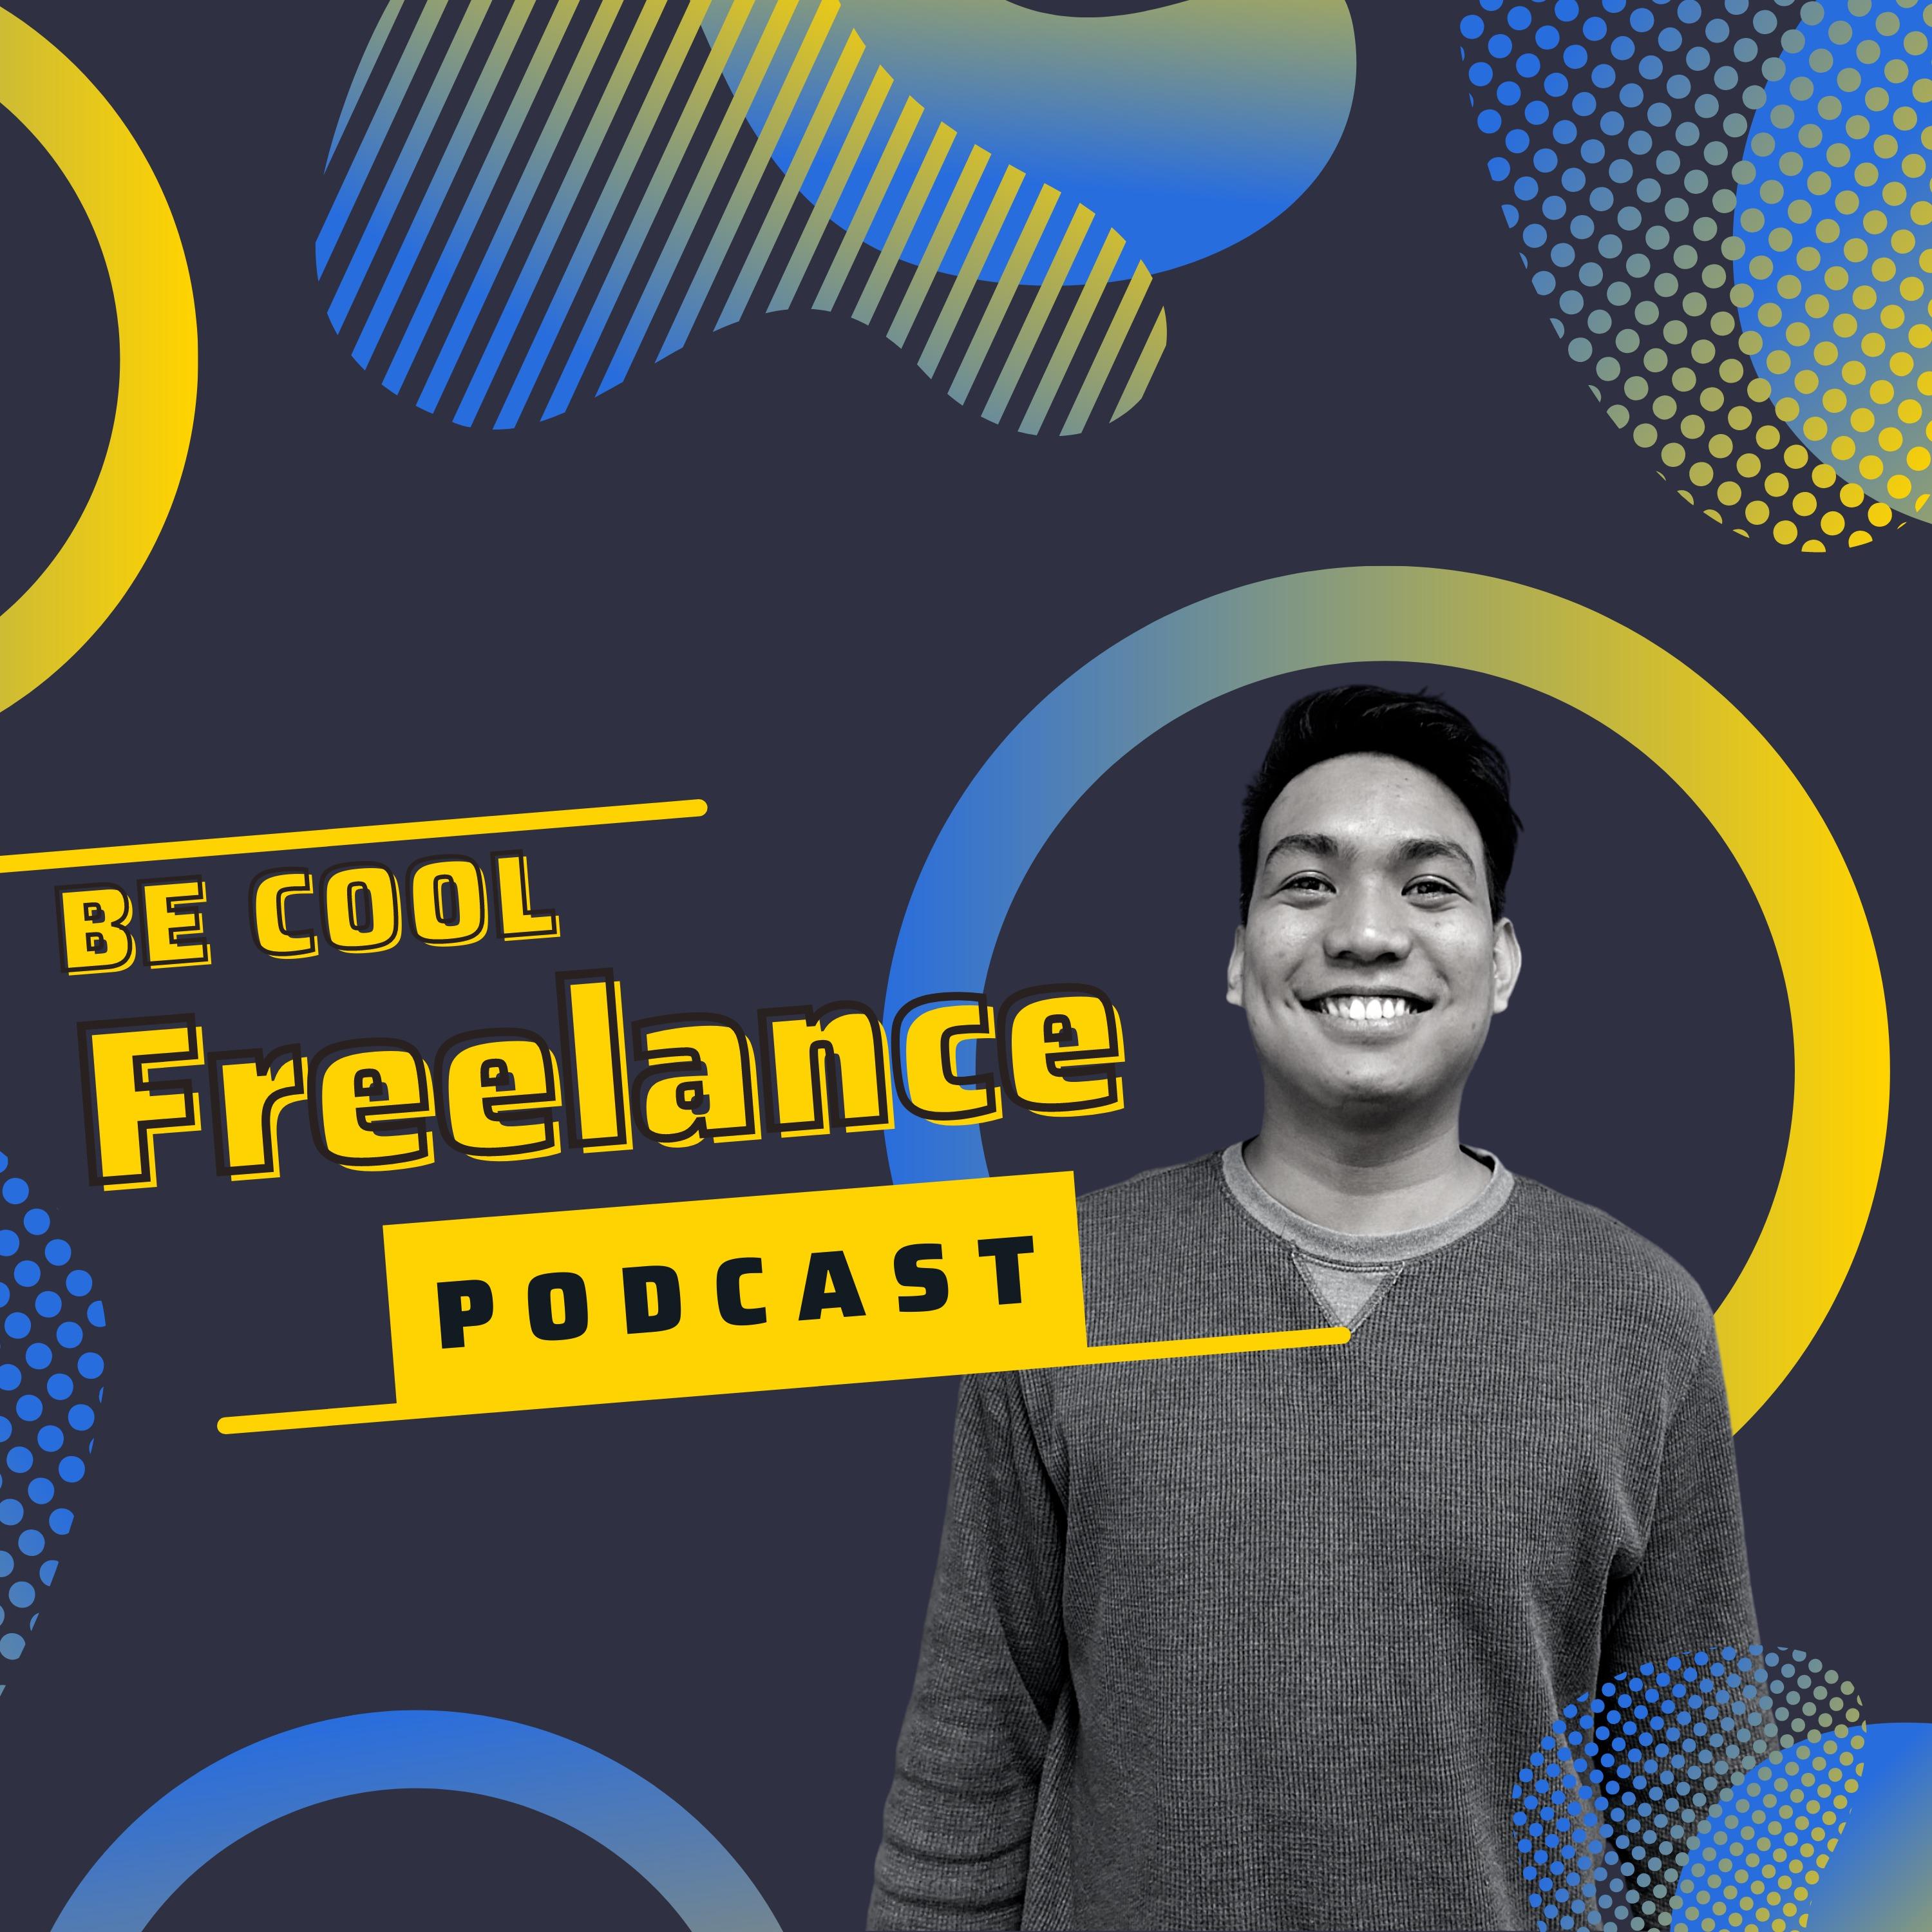 Be Cool Freelance Podcast